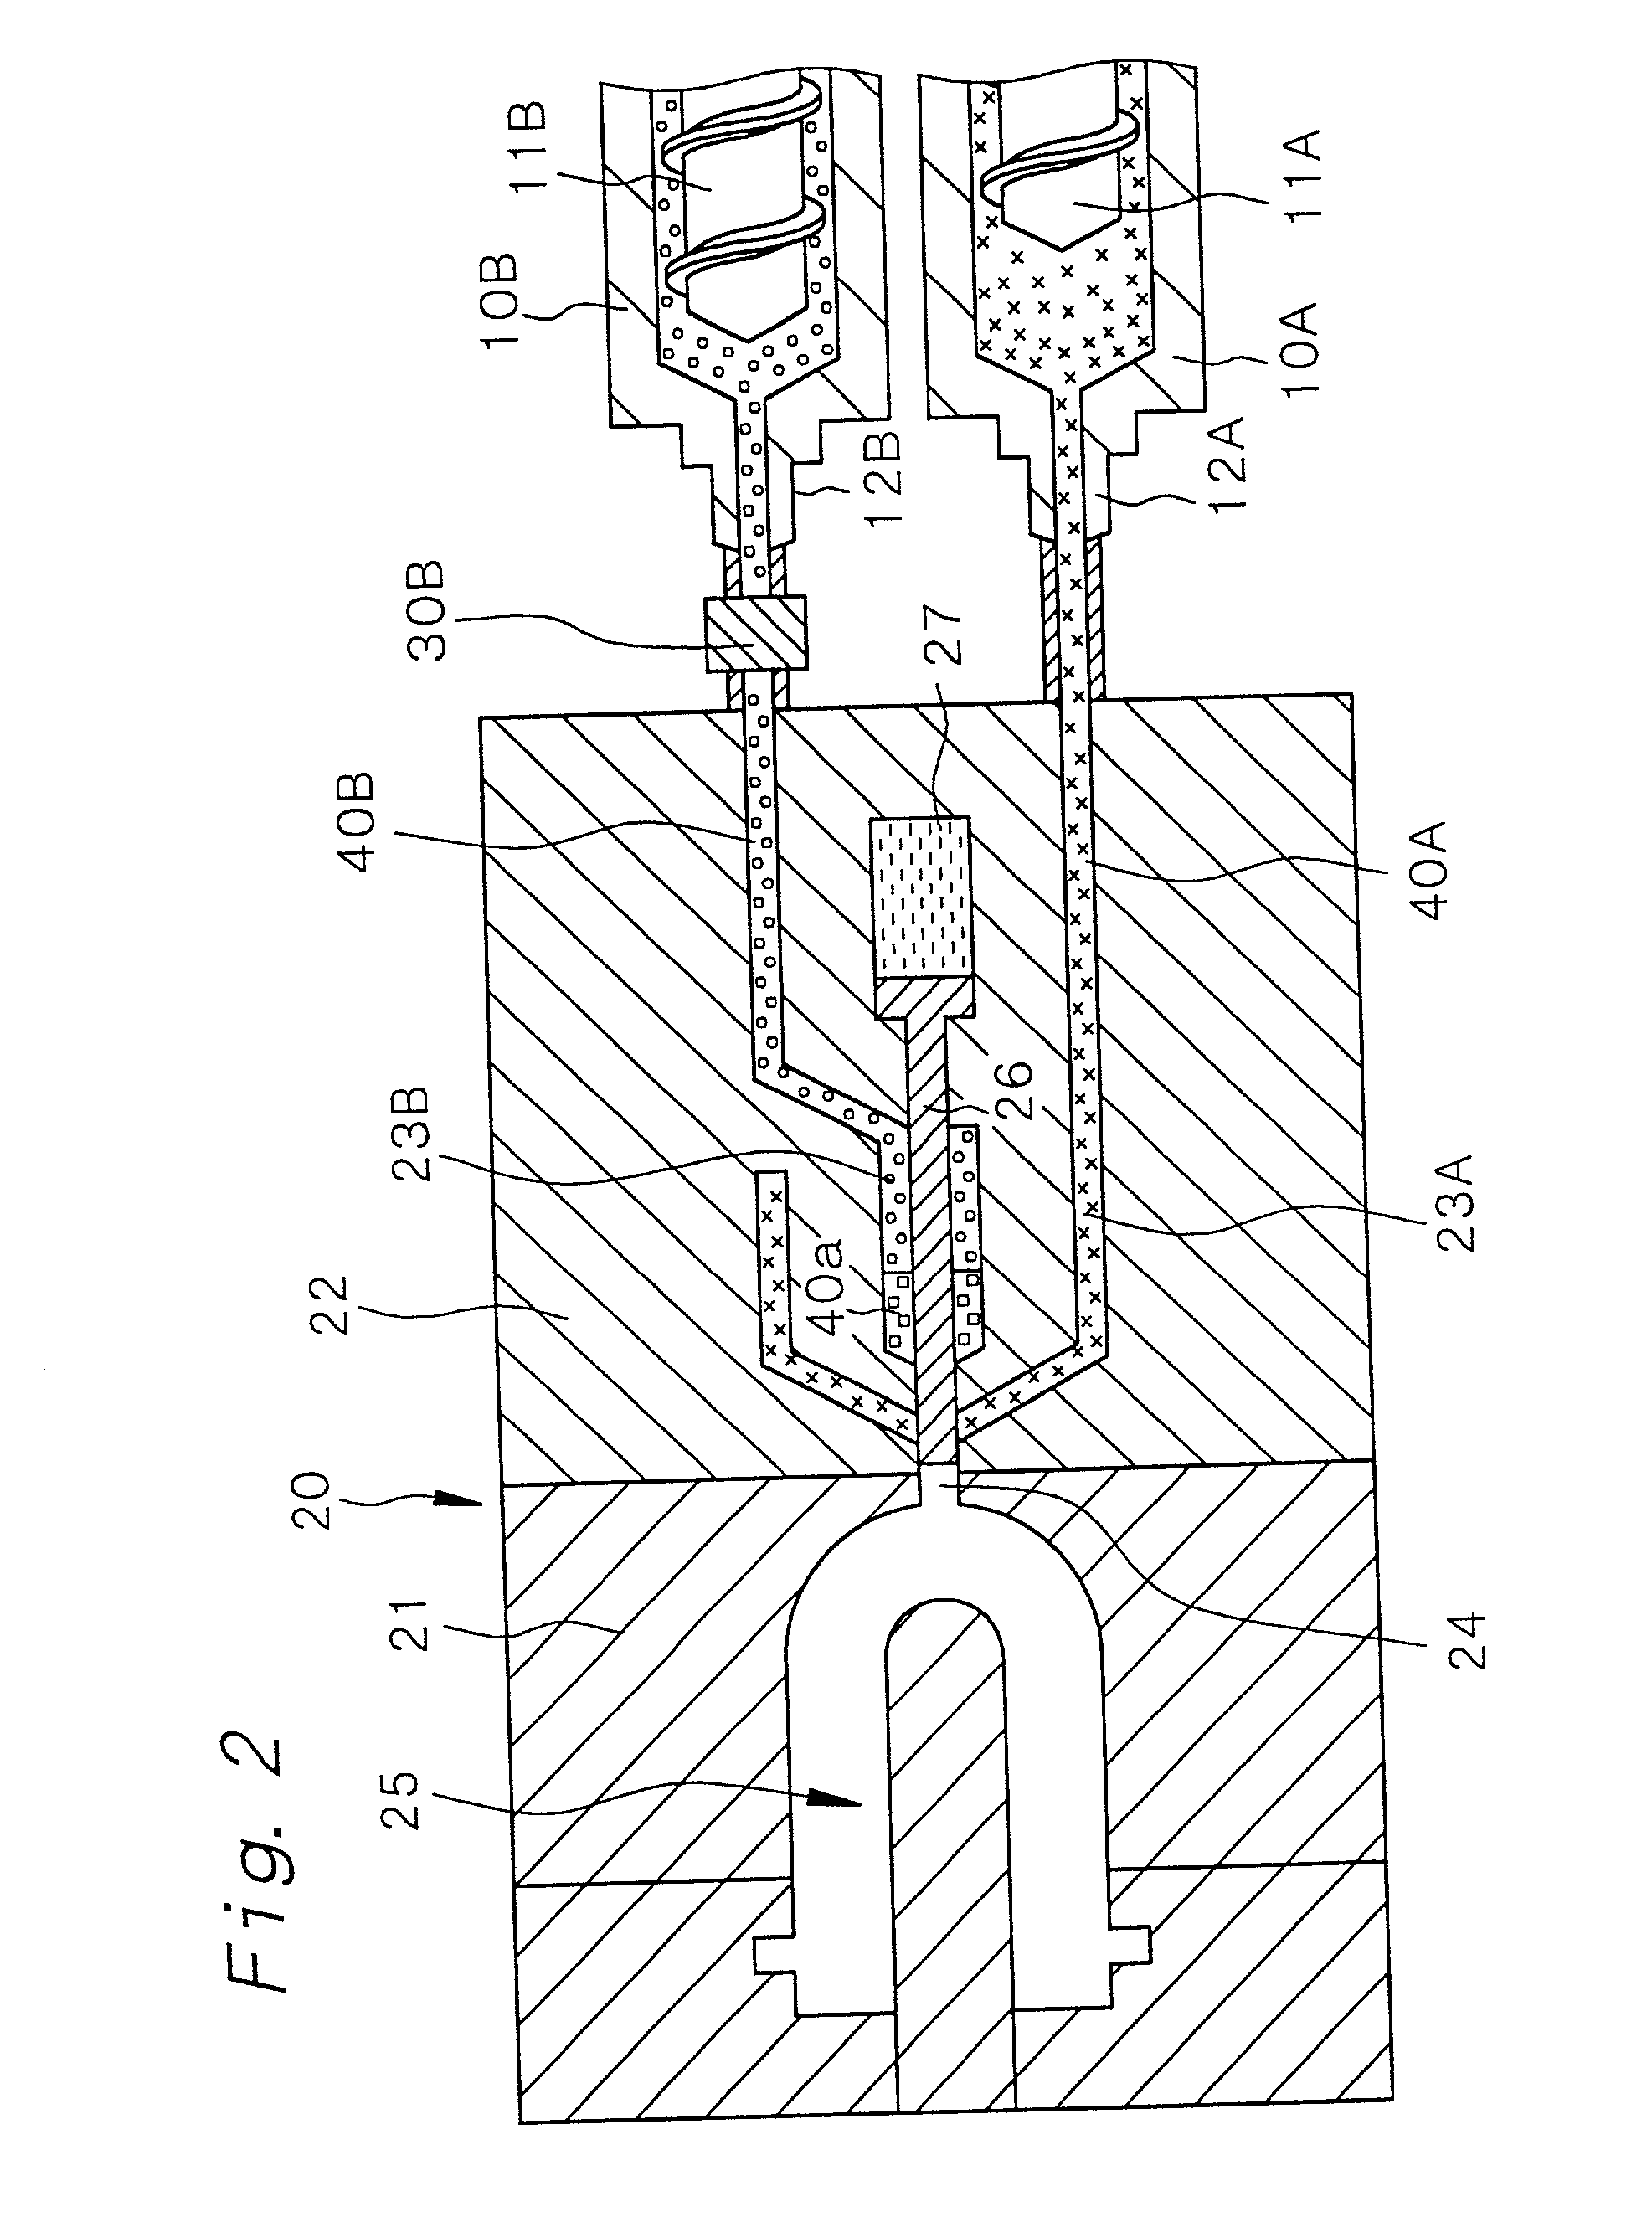 Injection molding apparatus for molding multi-layered article and method of injection-molding multi-layered article